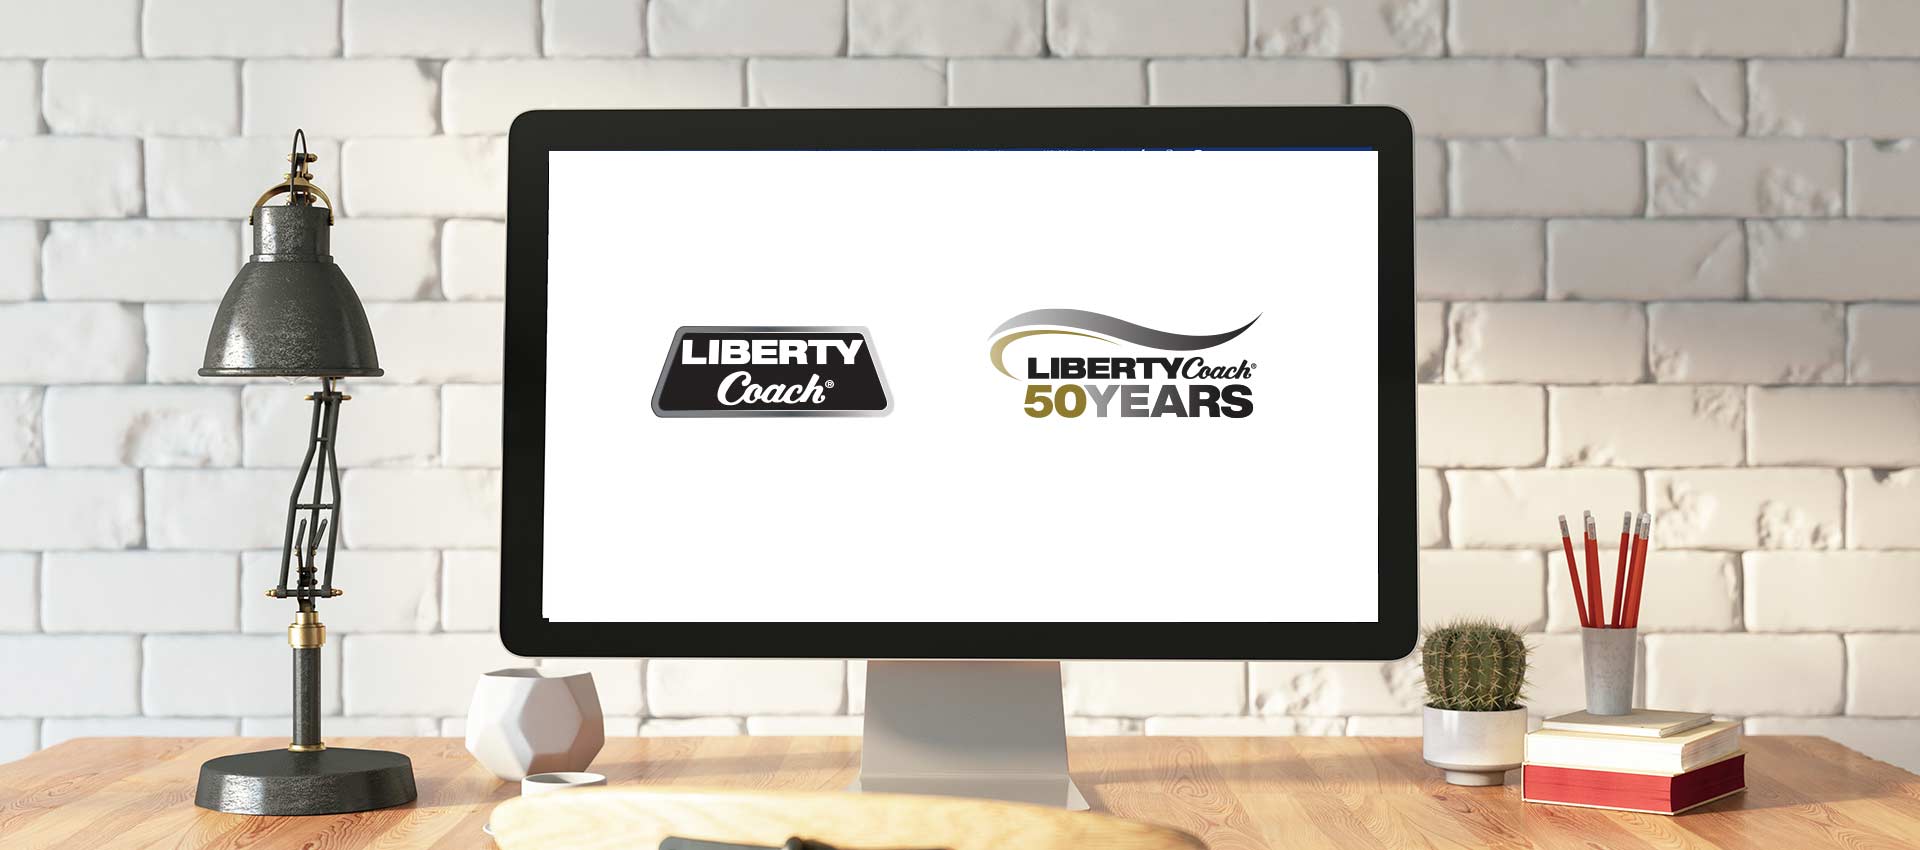 Front view of computer displaying Liberty Coach 50 year